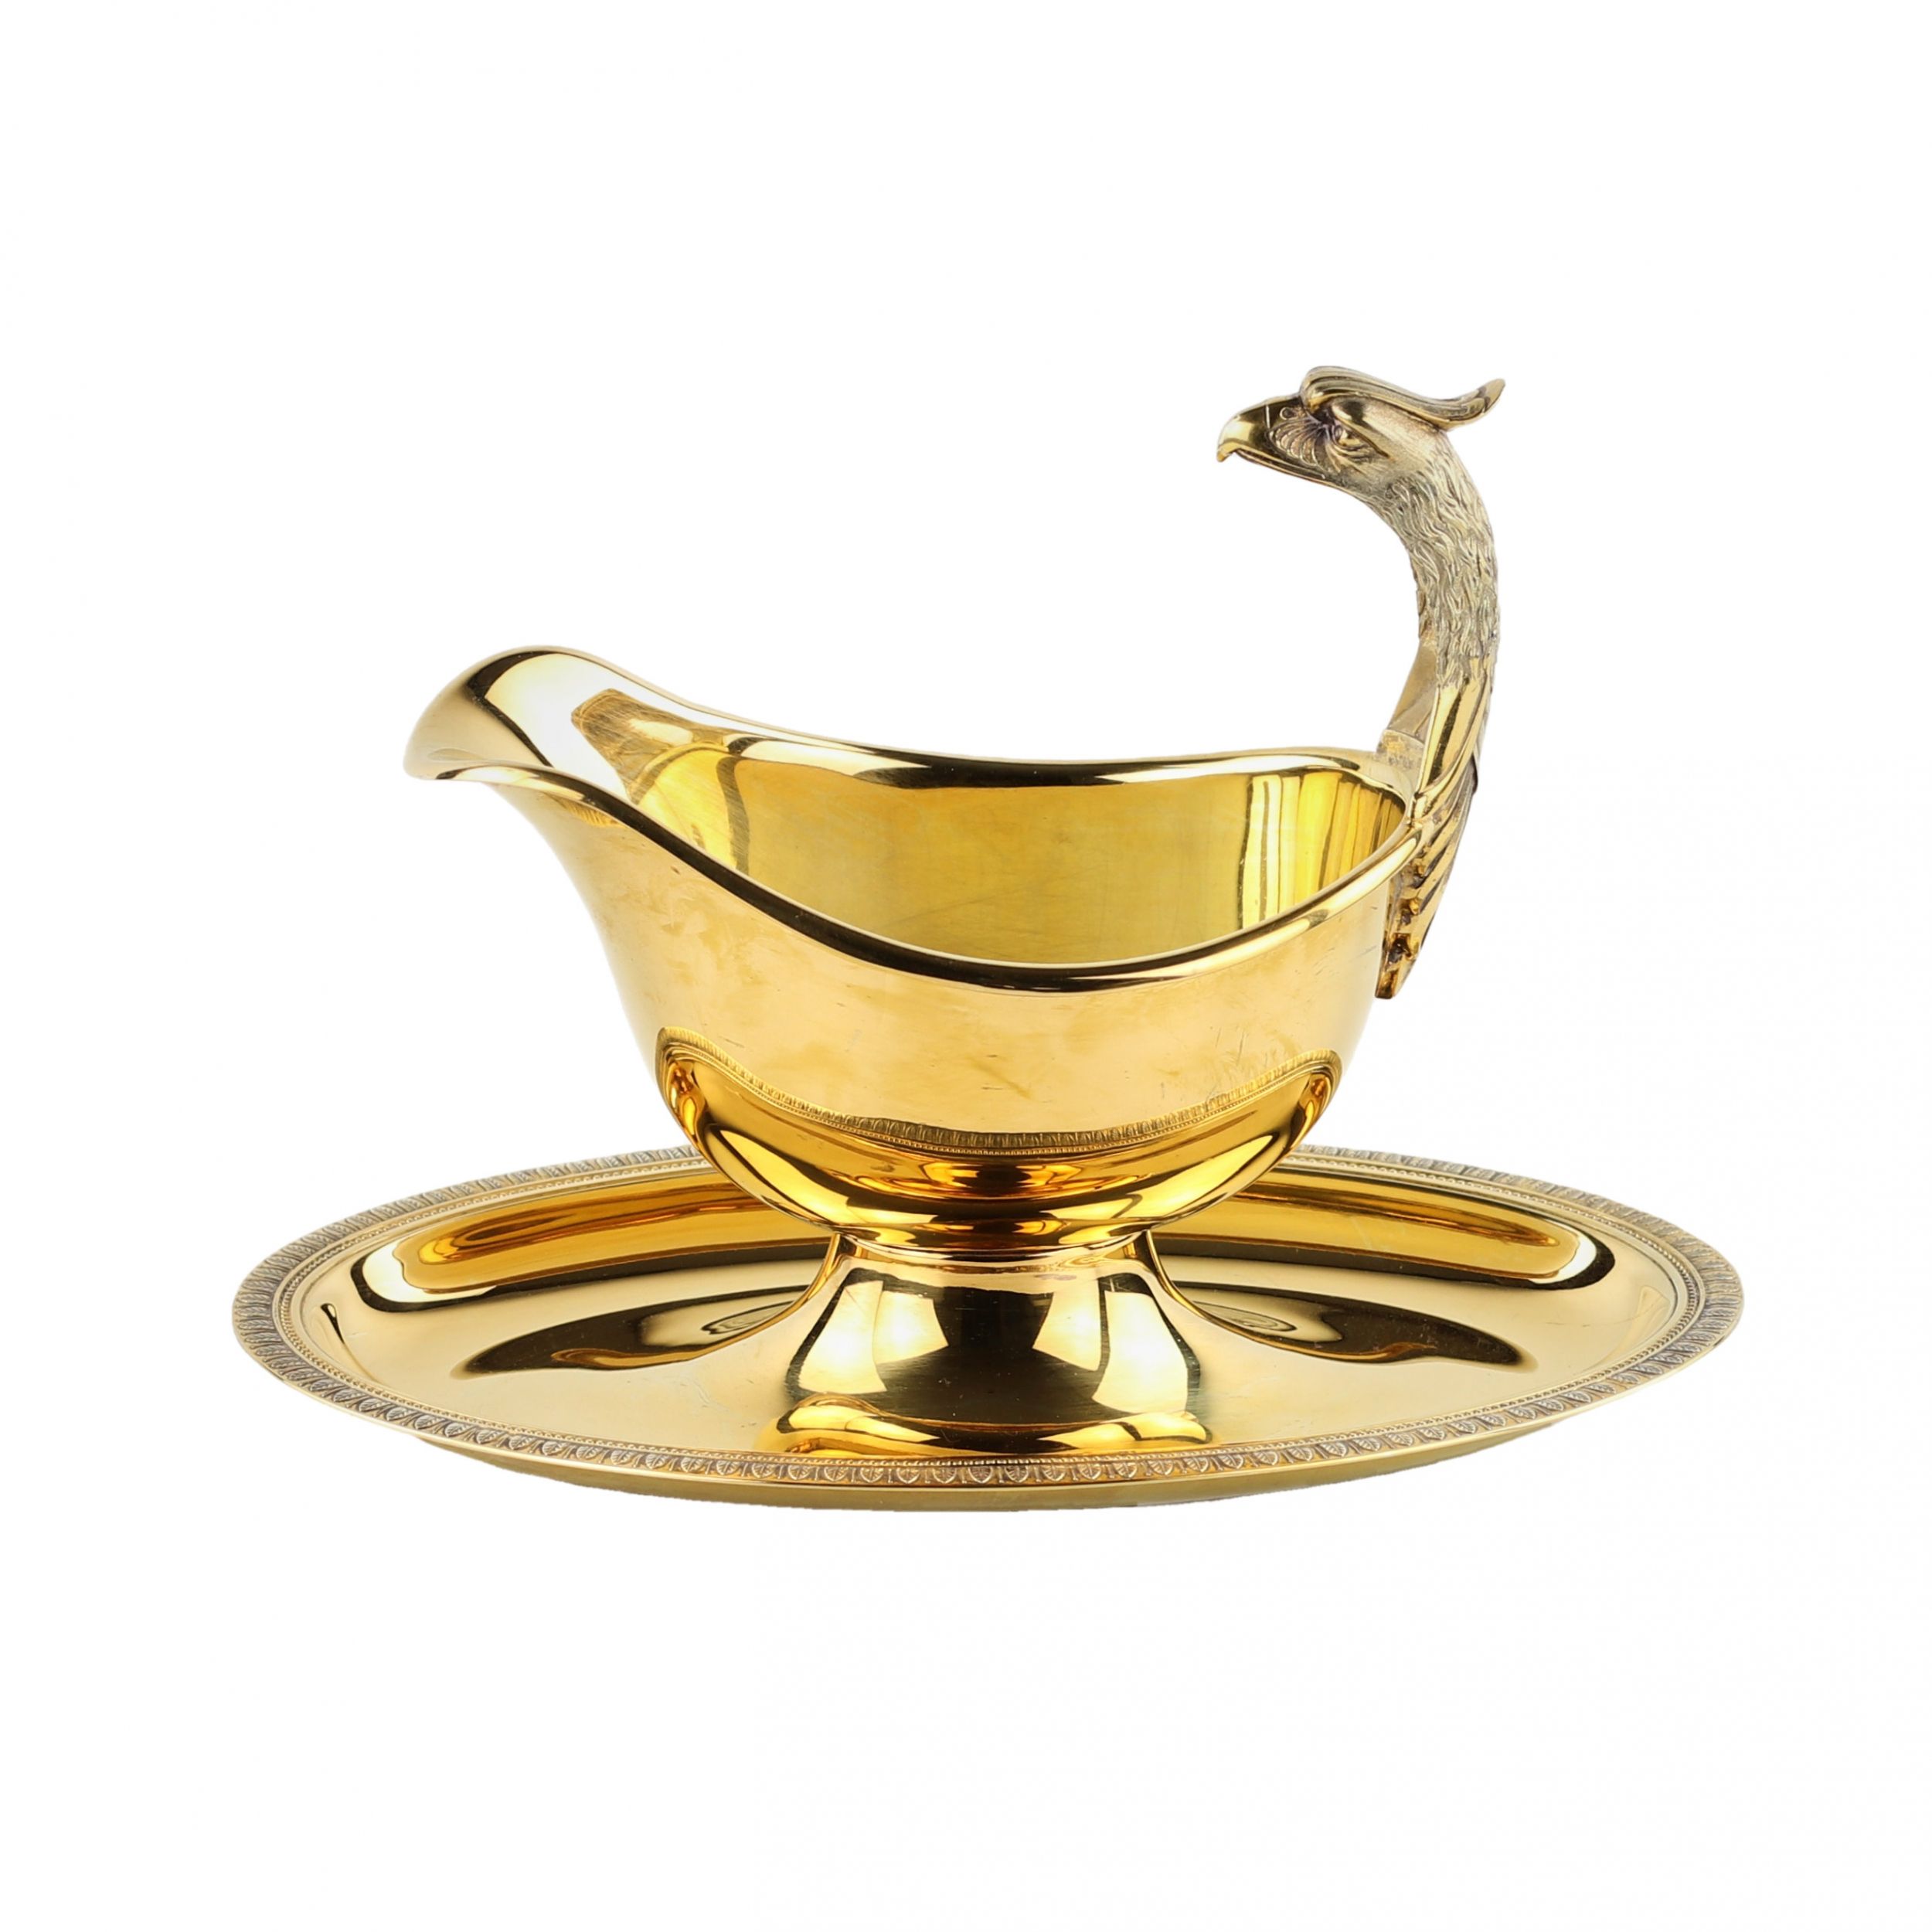 Christofle-Gilded-metal-gravy-boat-from-the-MalmIaison-series-